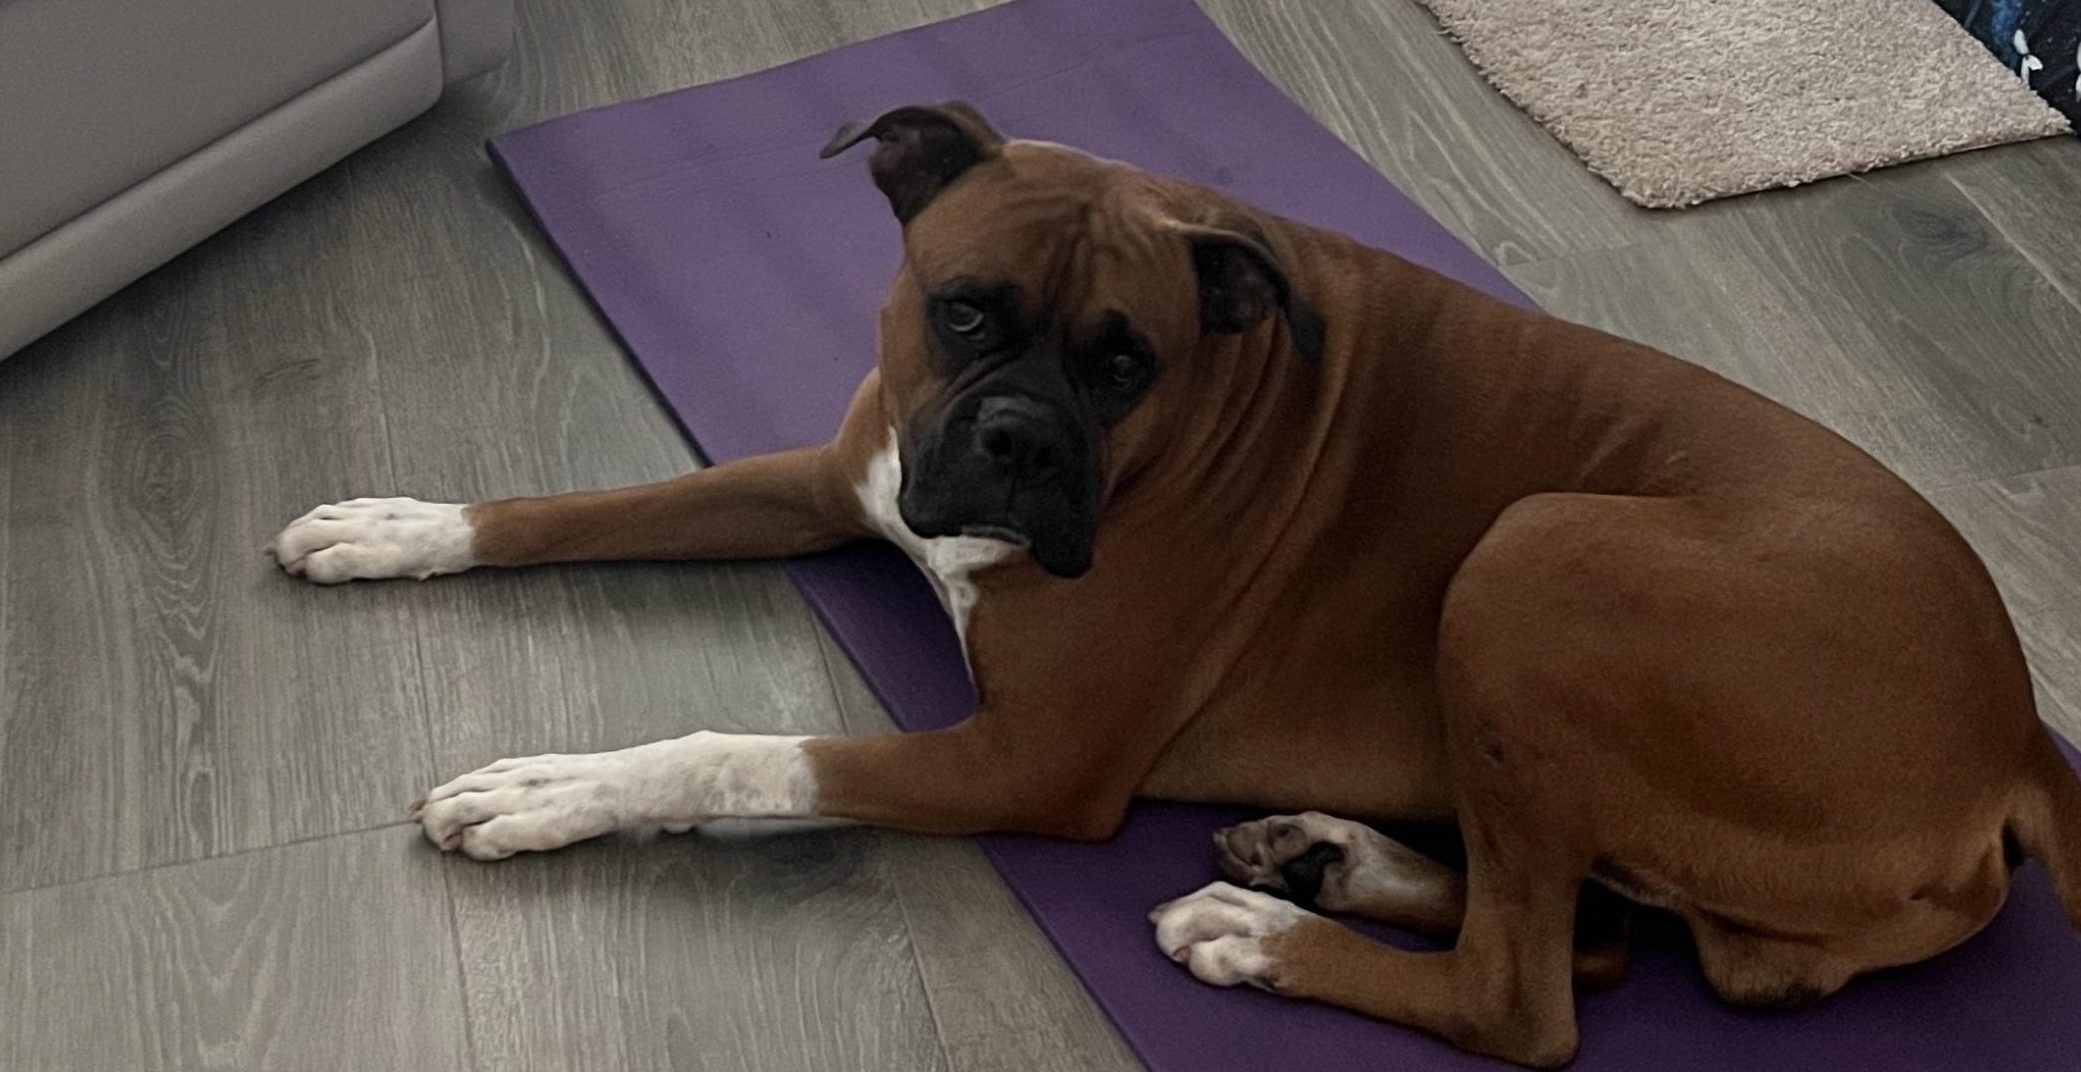 Relaxing on my Yoga Mat after a Long Night at the Studio...Woof!